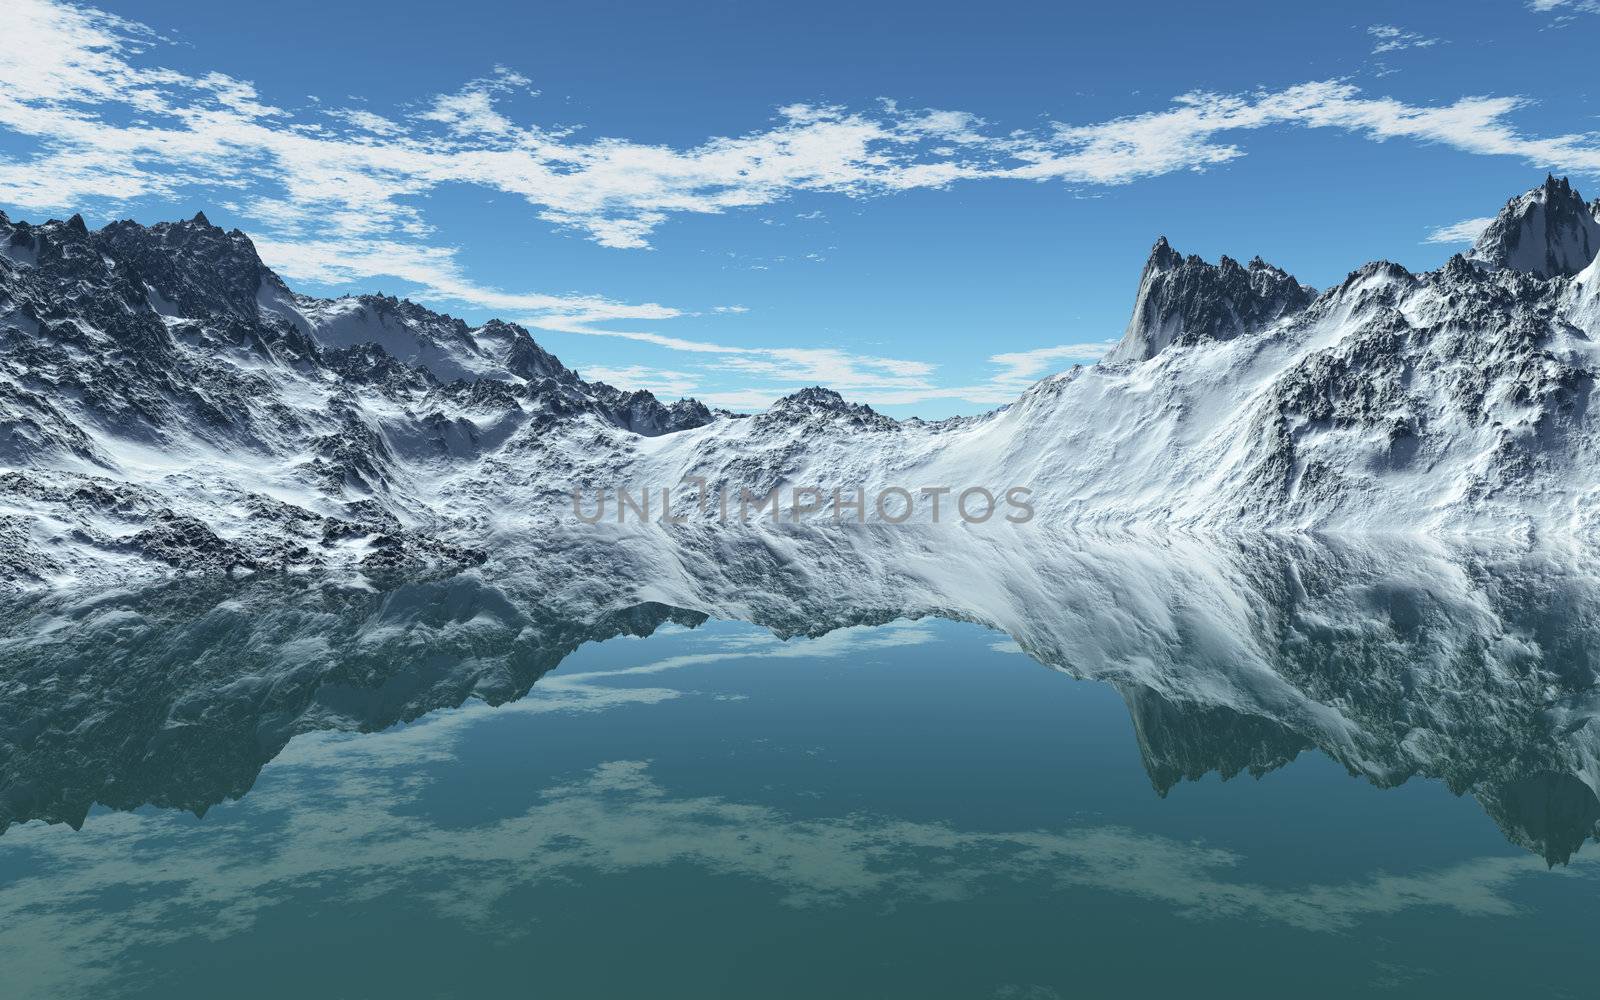 This image shows a cold mountain sea